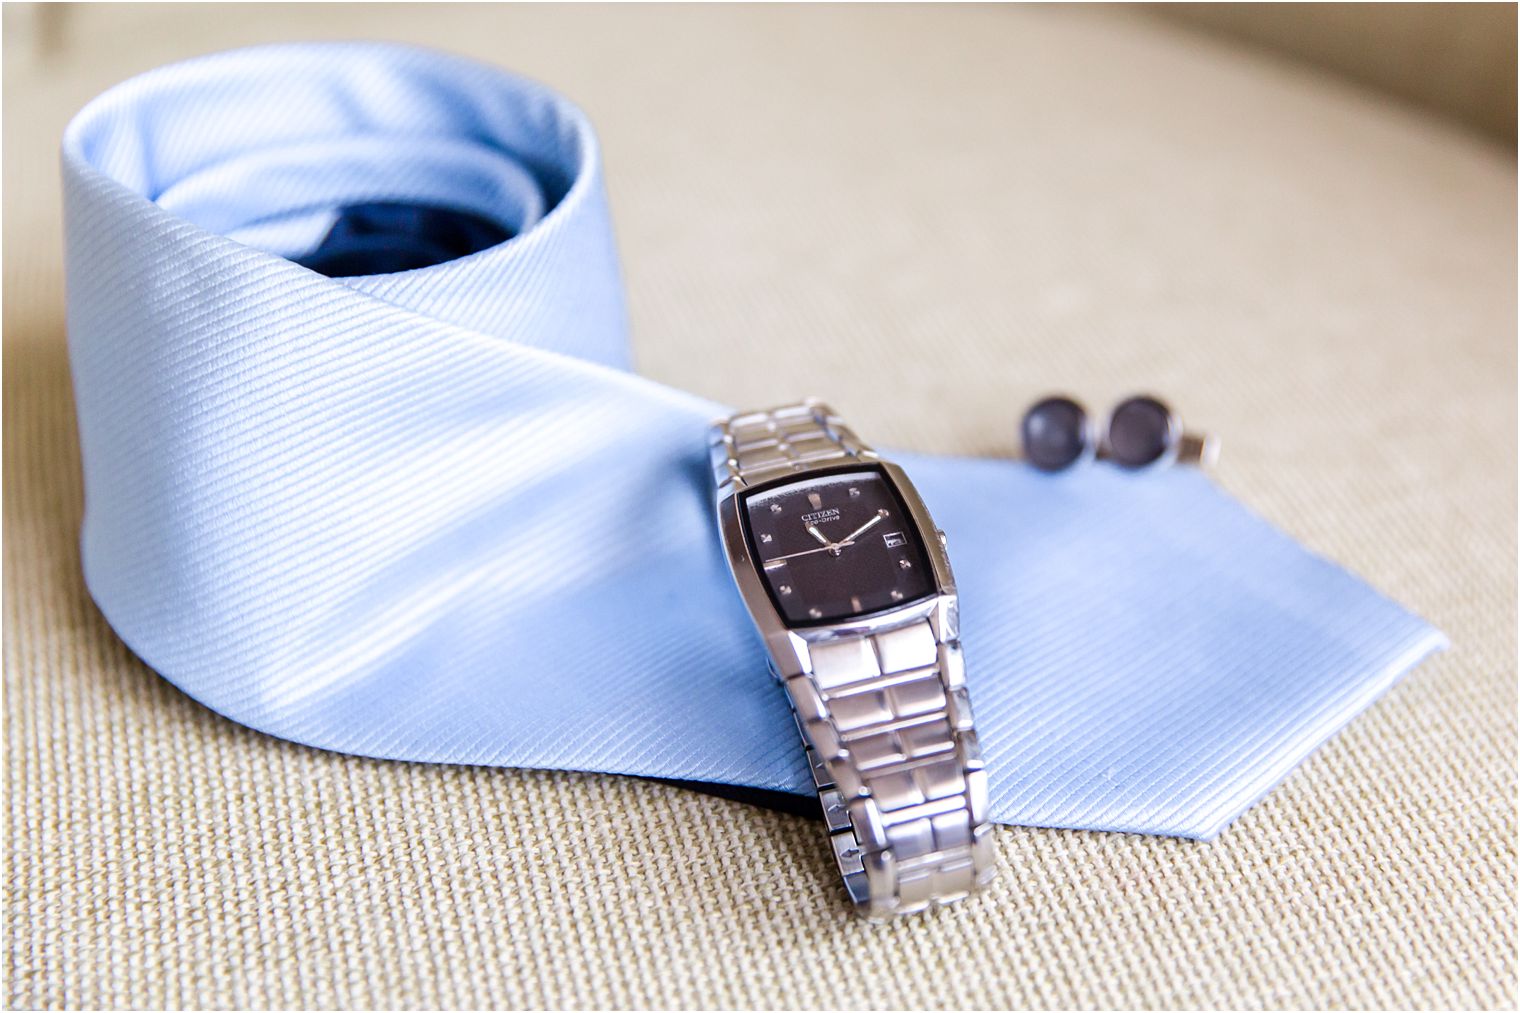 Groom watch and tie